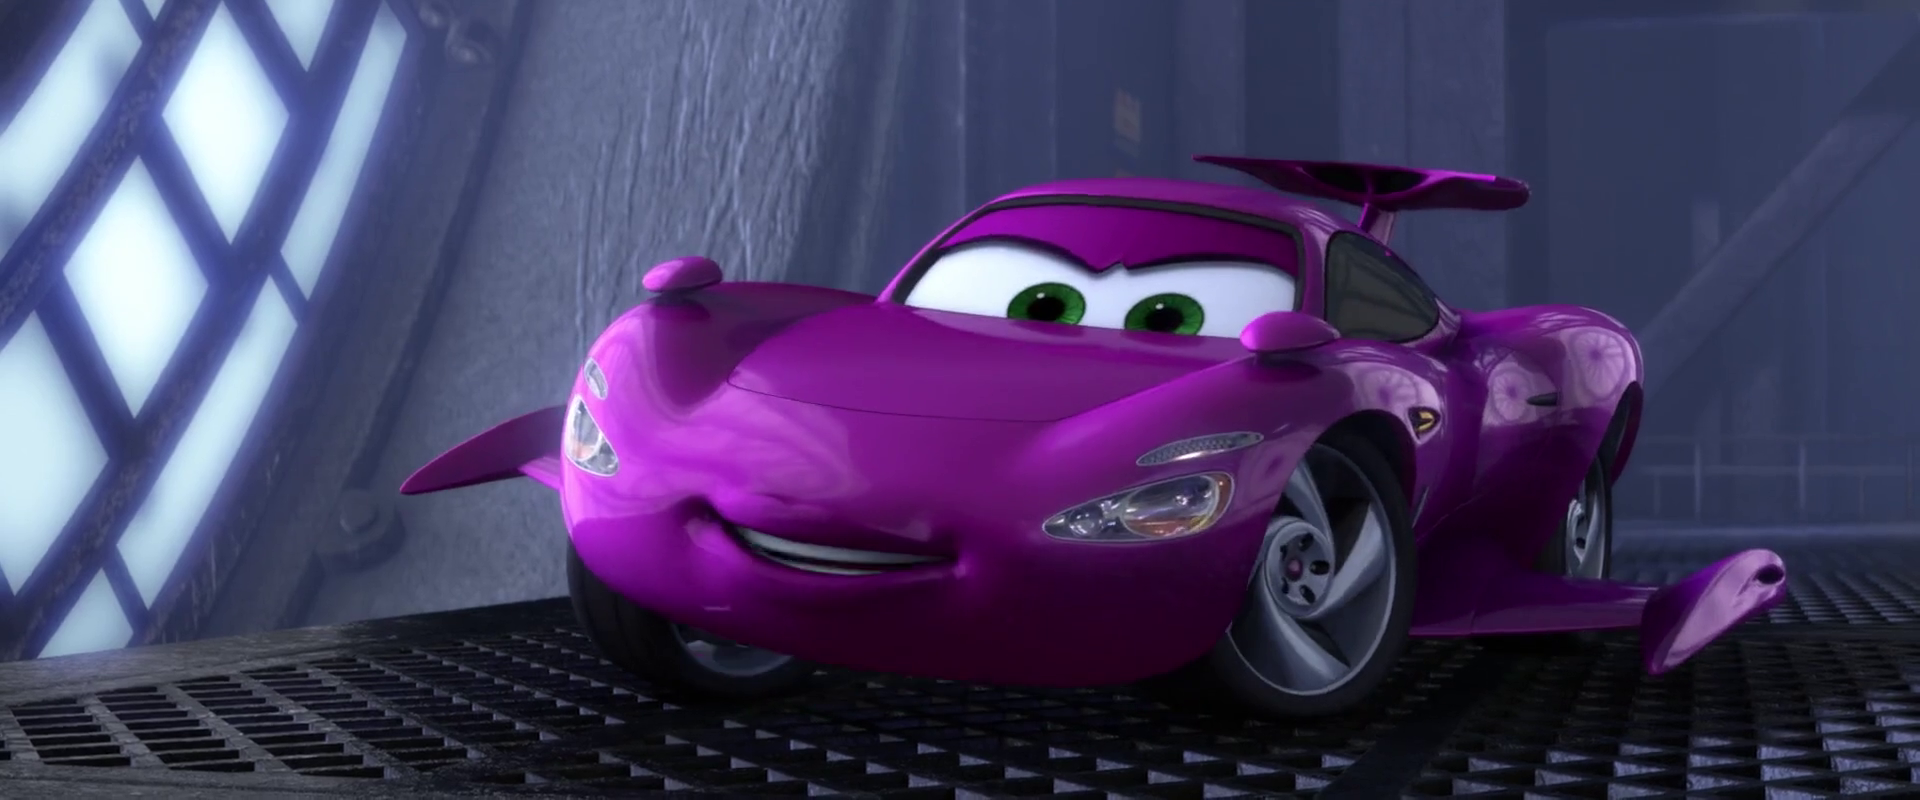 The Characters From 'Cars 2' Aren't Featured in 'Cars 3